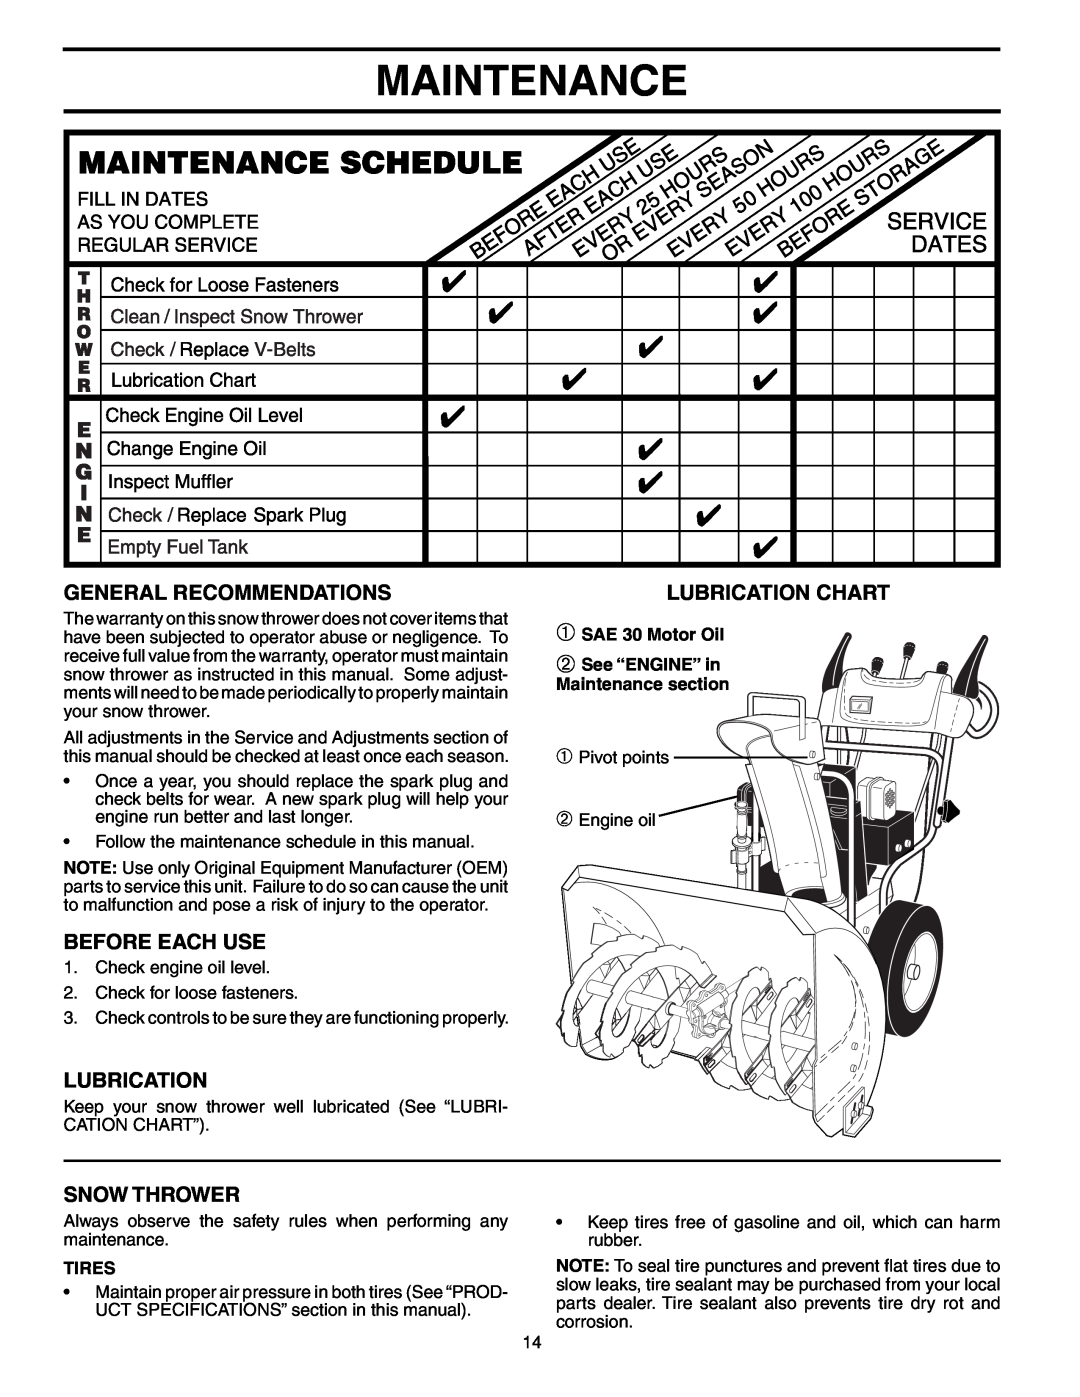 Poulan PP927ESC Maintenance, General Recommendations, Before Each Use, Snow Thrower, Lubrication Chart, Tires 